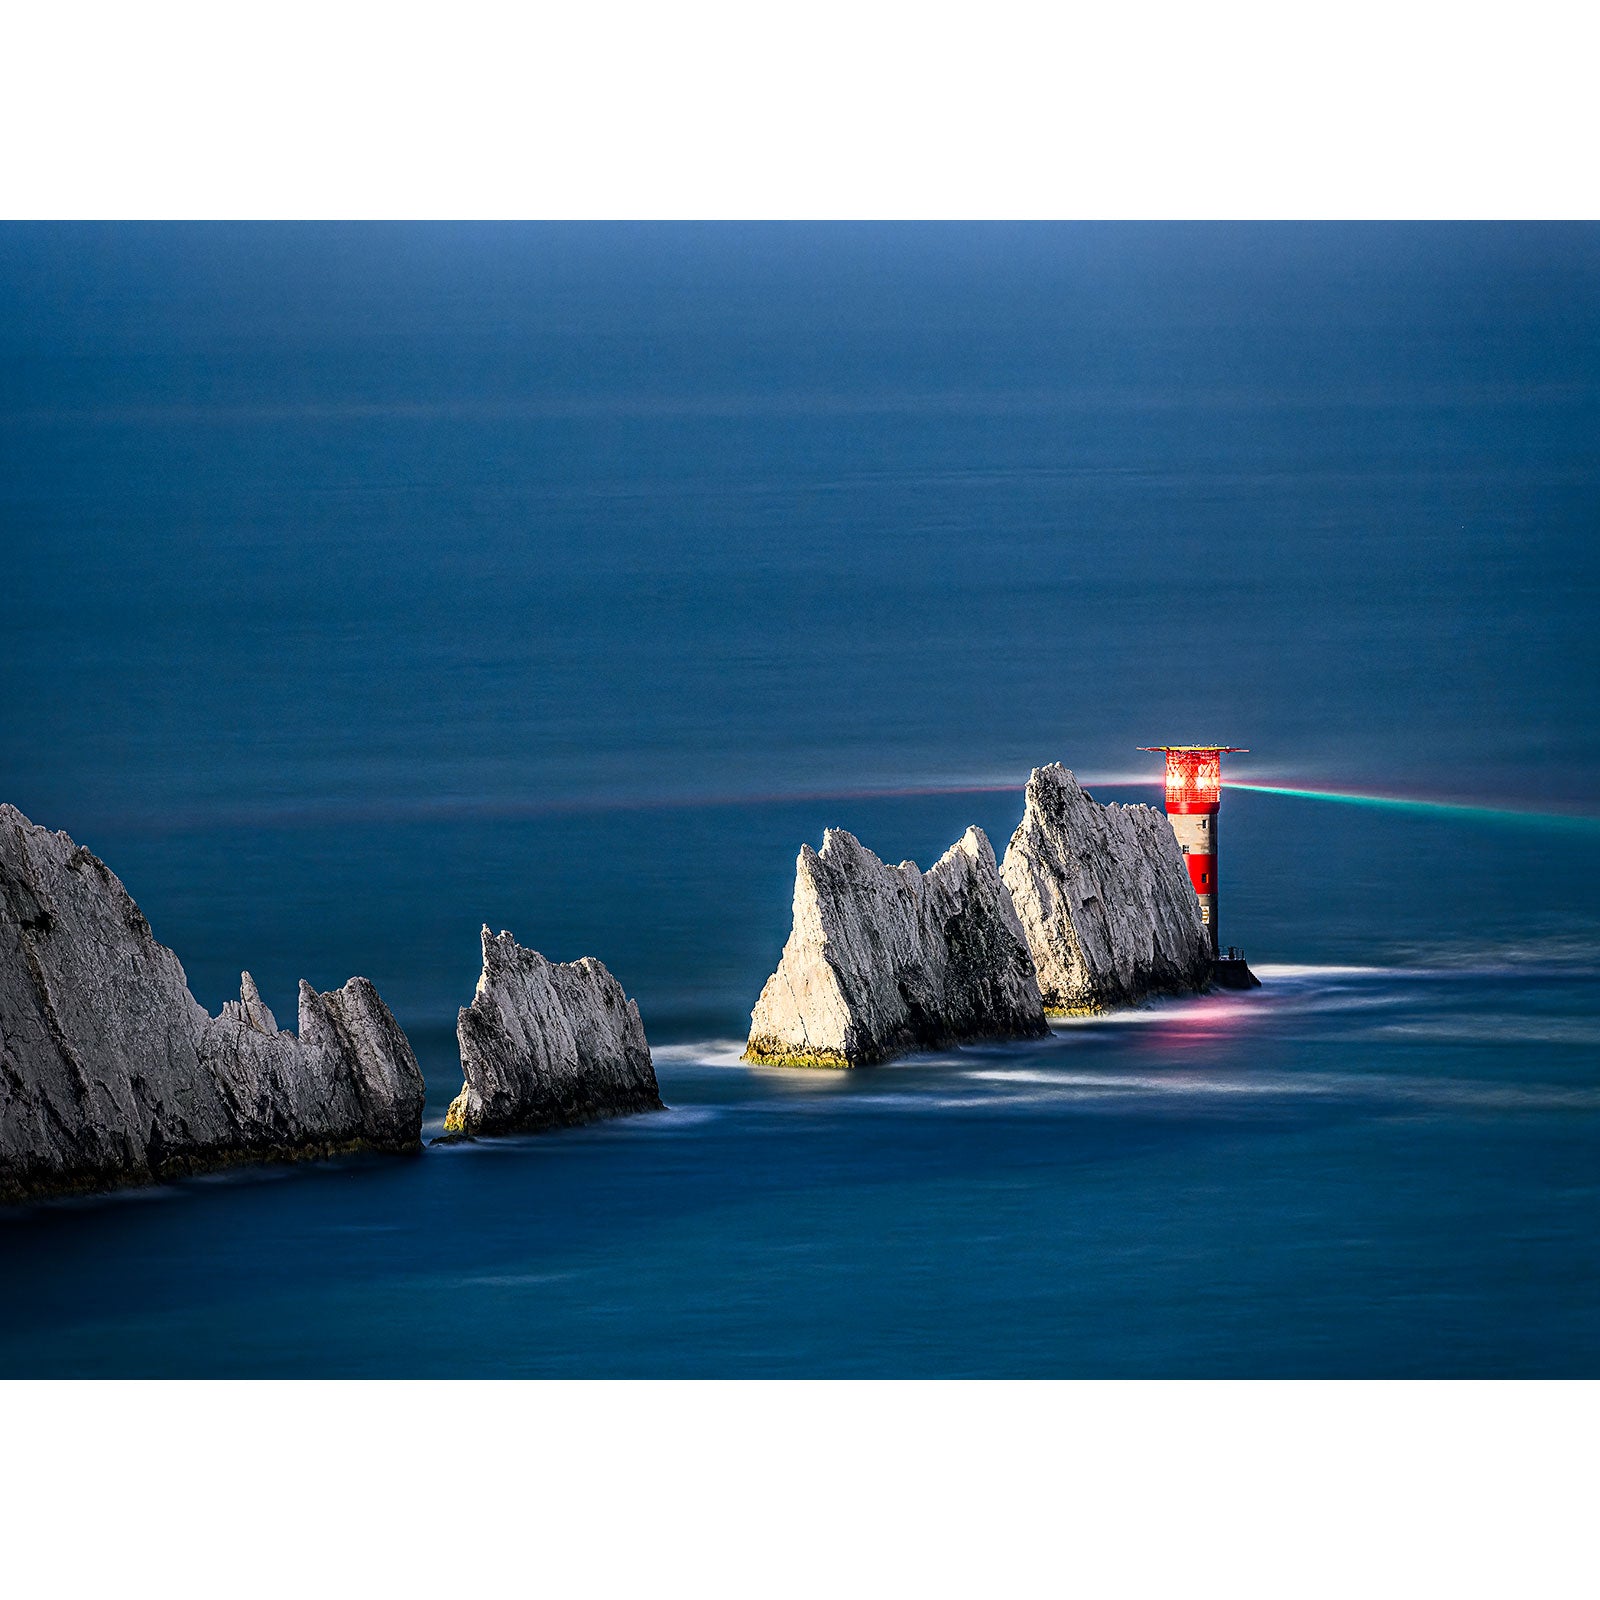 The Needles by Moonlight lighthouse stands at the end of a series of jagged white cliffs extending into a blue sea on the Isle of Wight, captured beautifully by Available Light Photography.